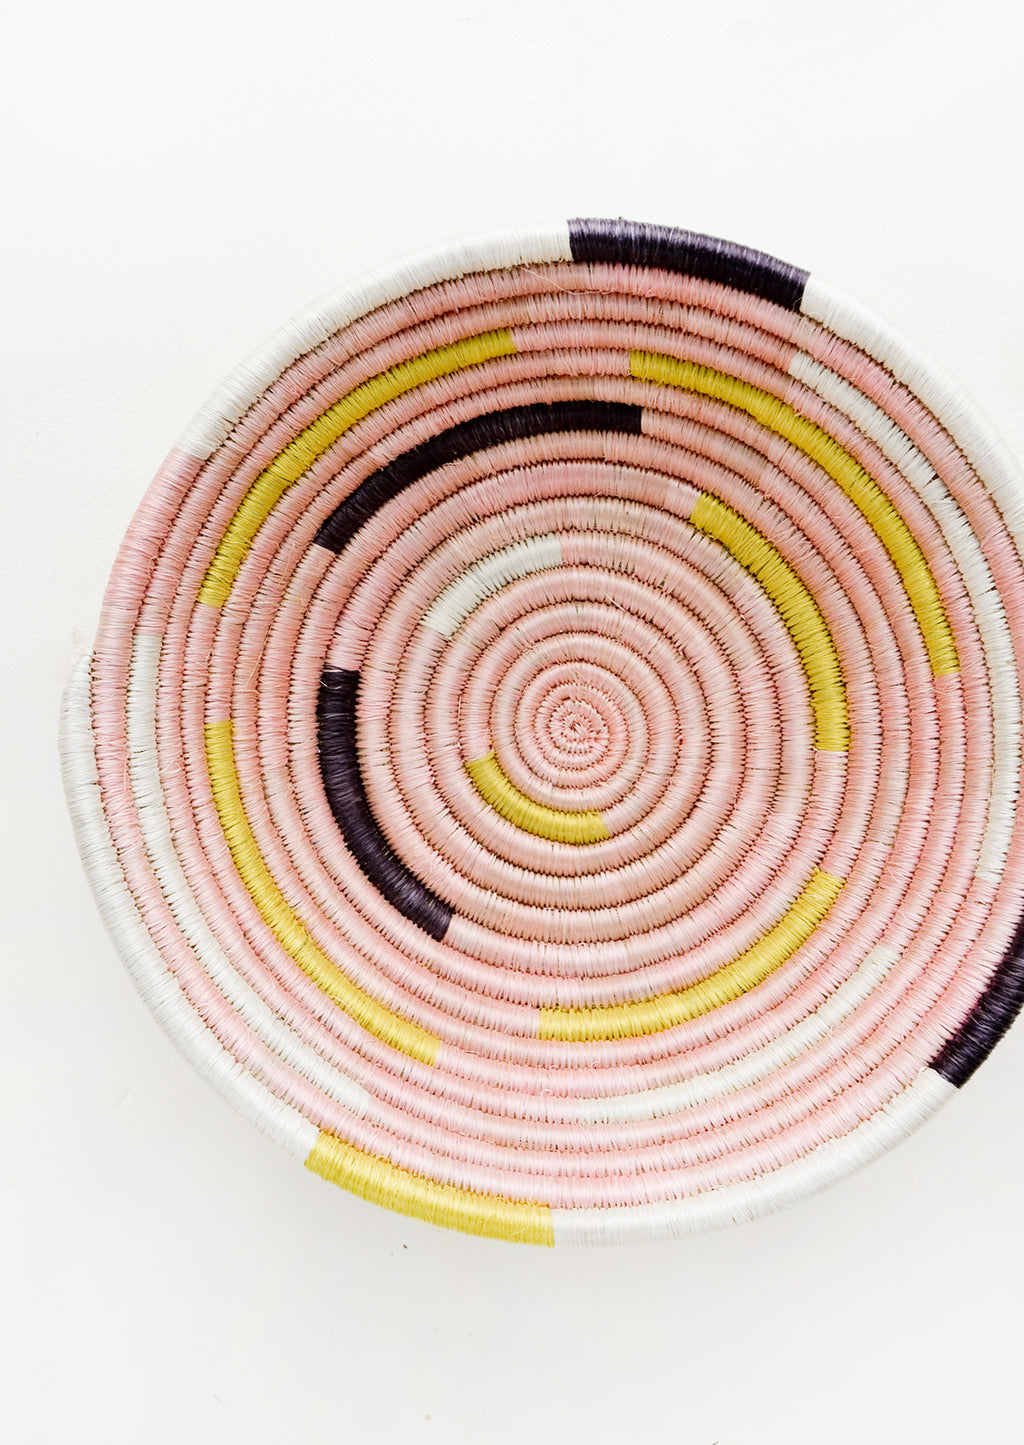 1: Round bowl made from woven sweetgrass in pink, white, yellow and black modern spiral design.